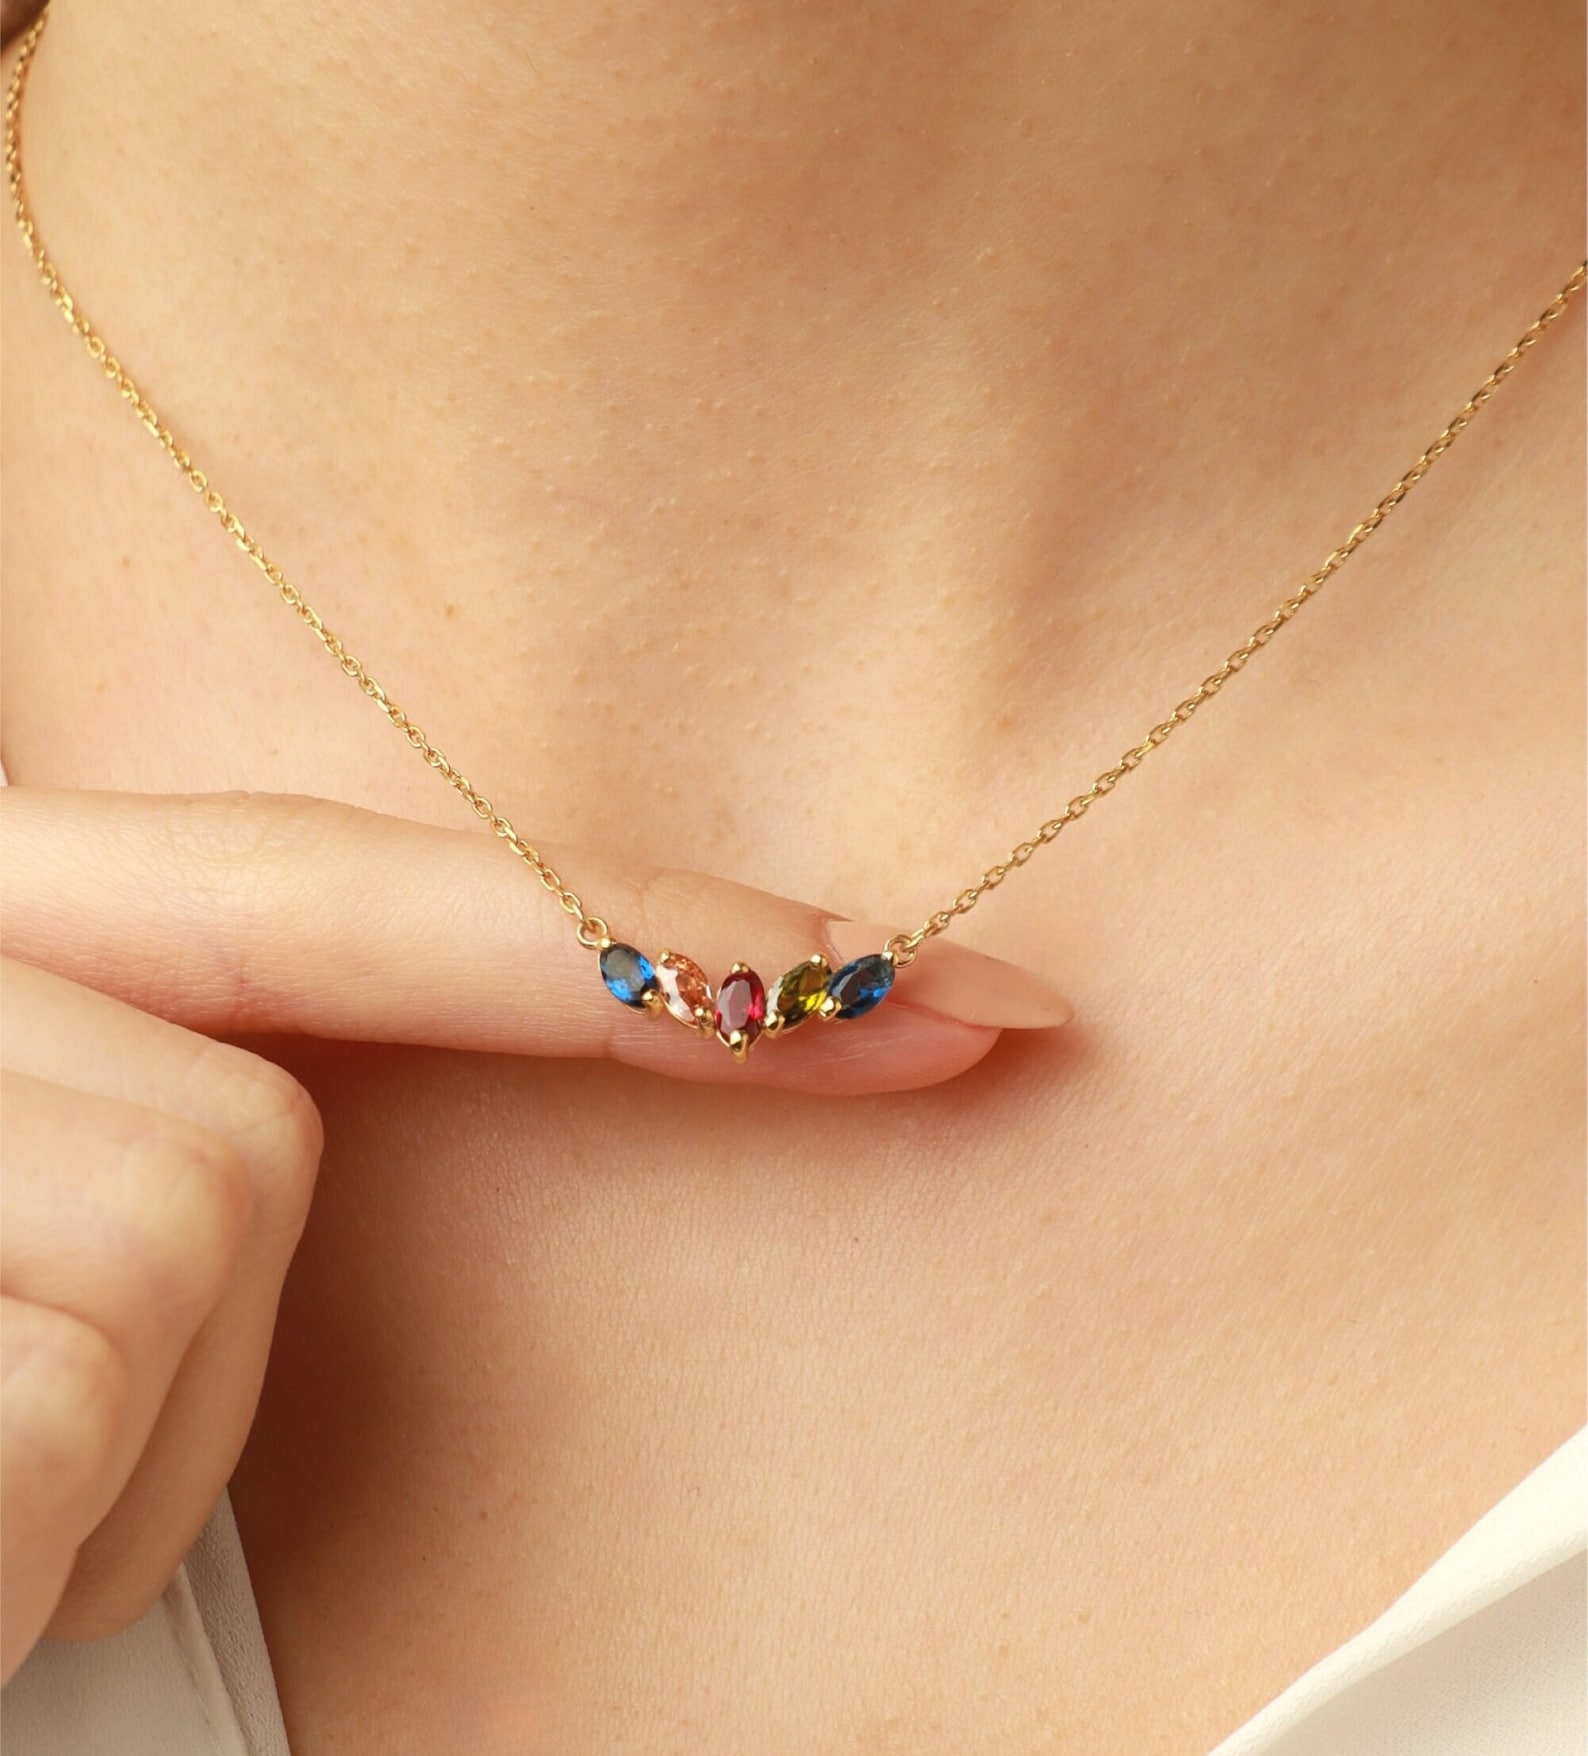 A birthstone necklace with 5 colored stones on a gold plated chain